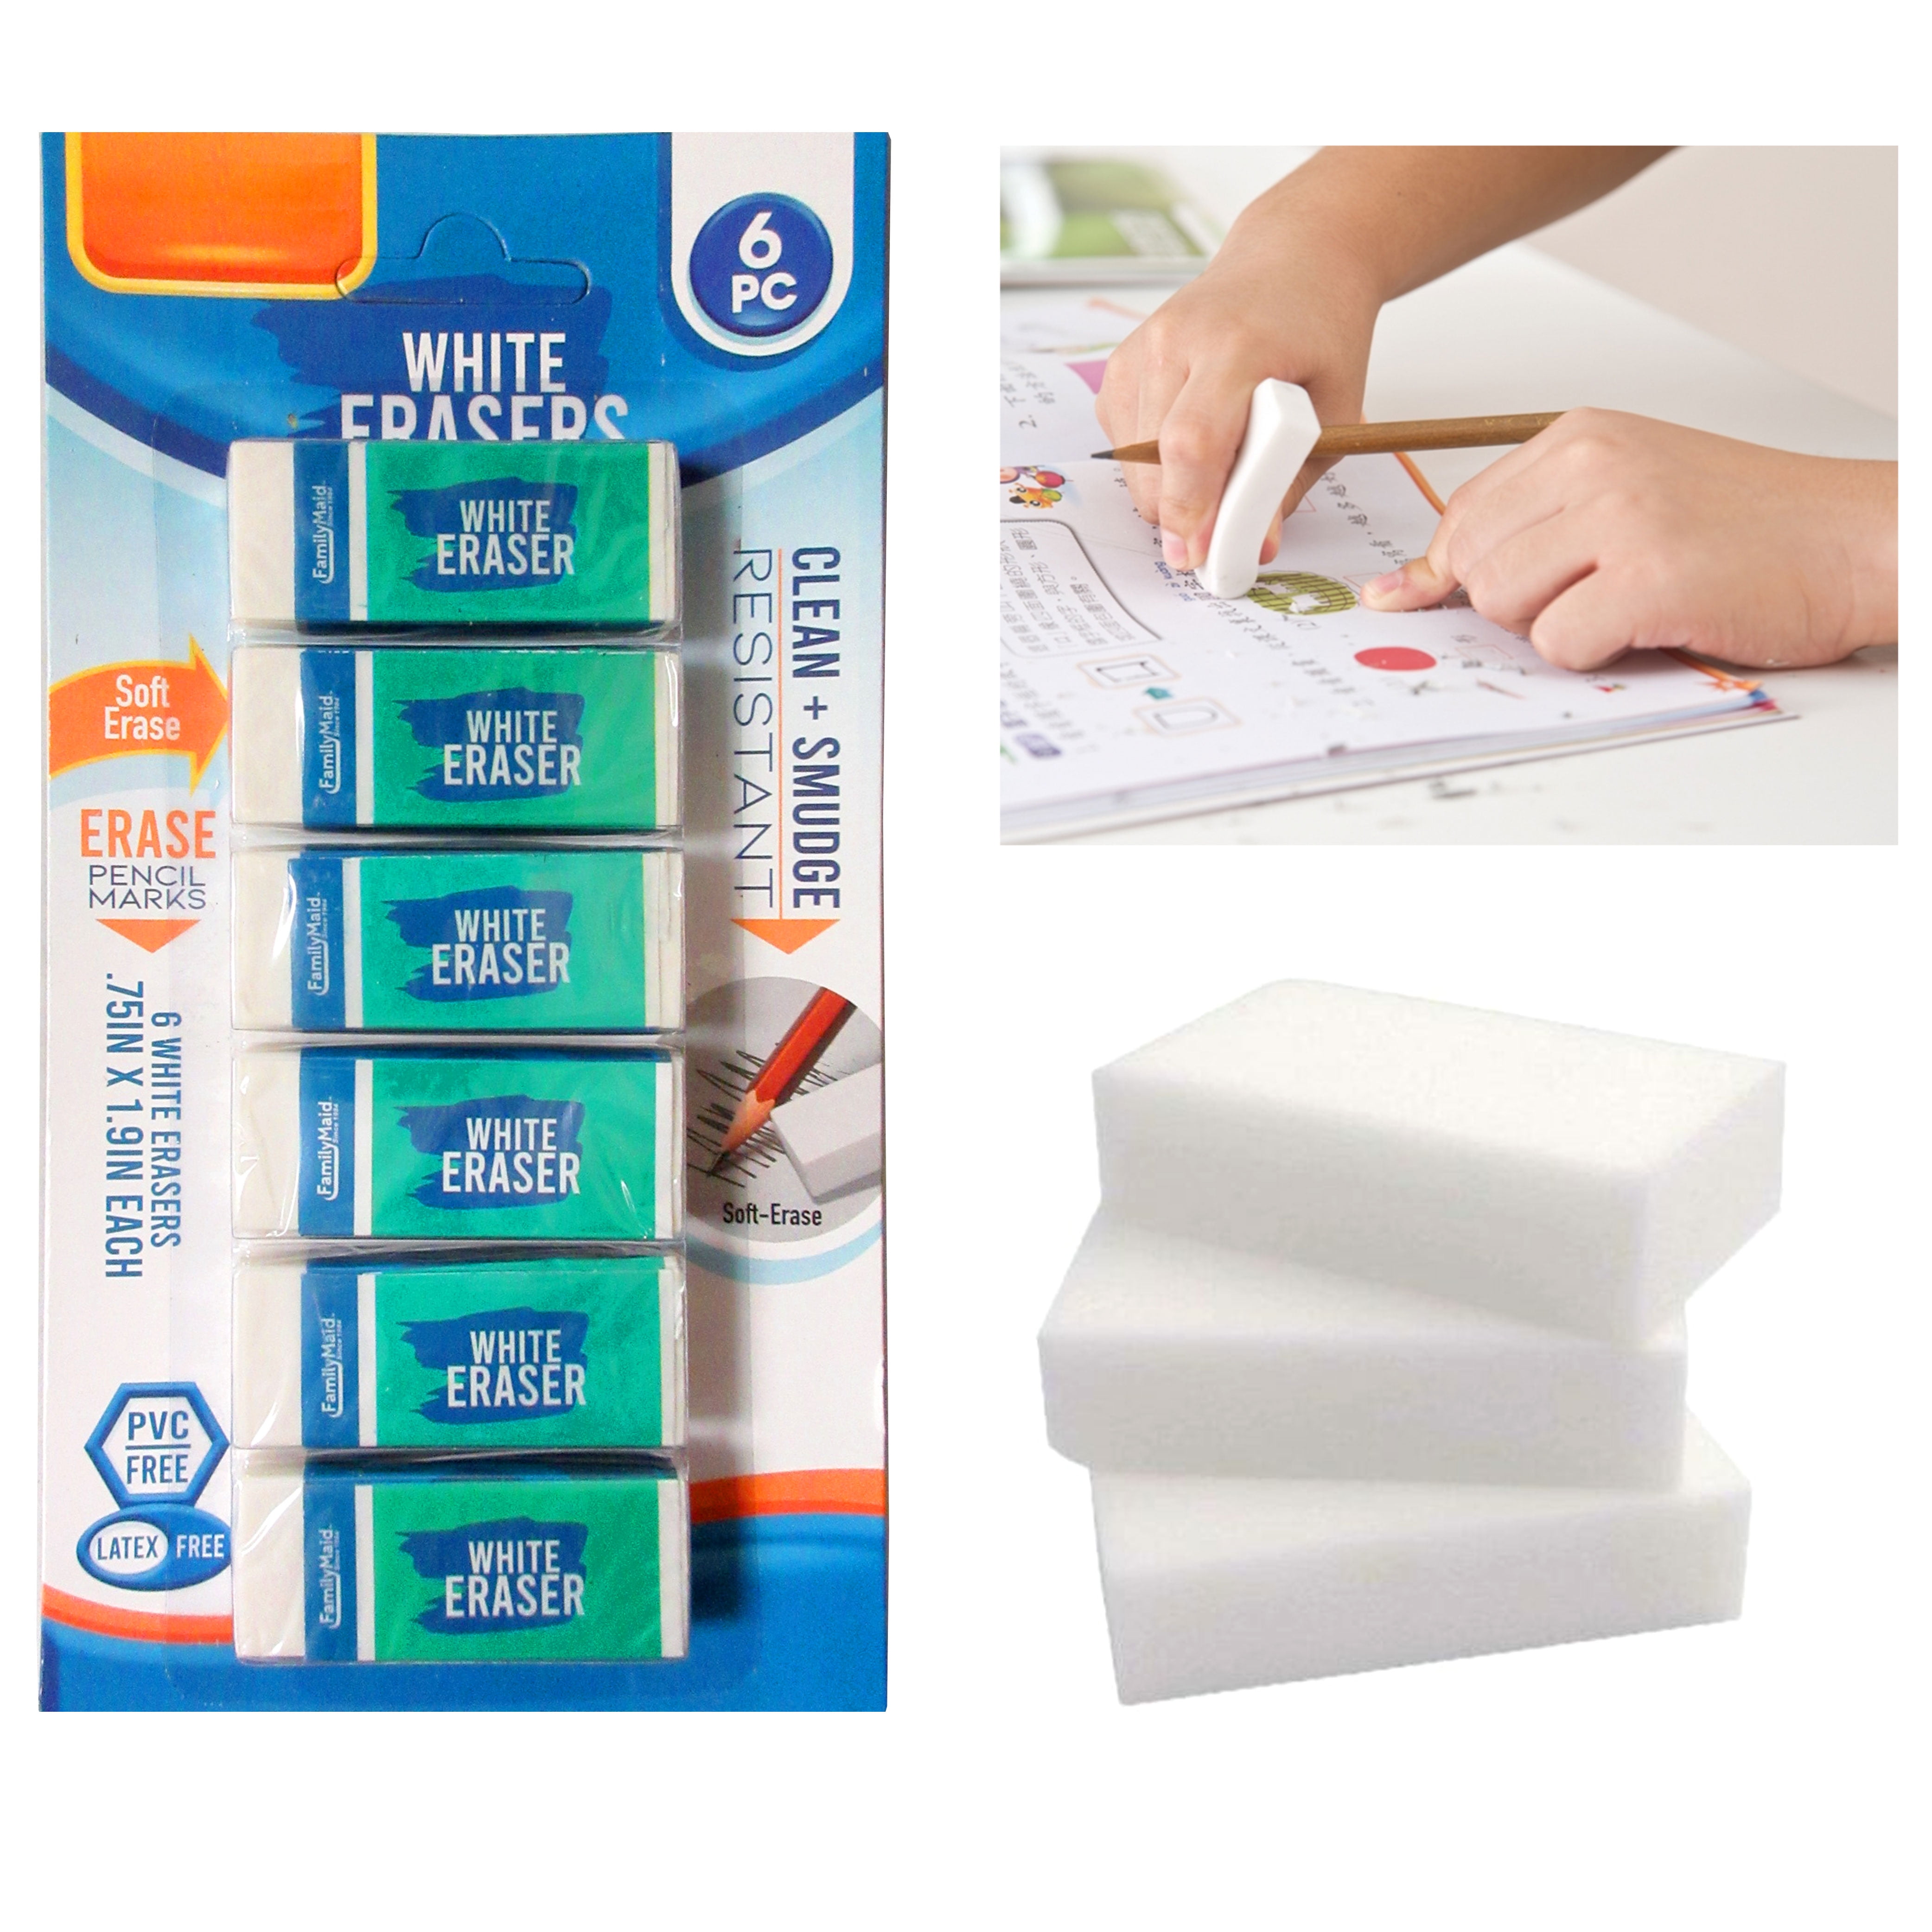  Marie's Erasers - Durable Non-Smearing Artist Erasers for  Erasing, Smudging, Creating Highlights & Details, Urban Sketching, & More!  - Multipack of 4 : Everything Else